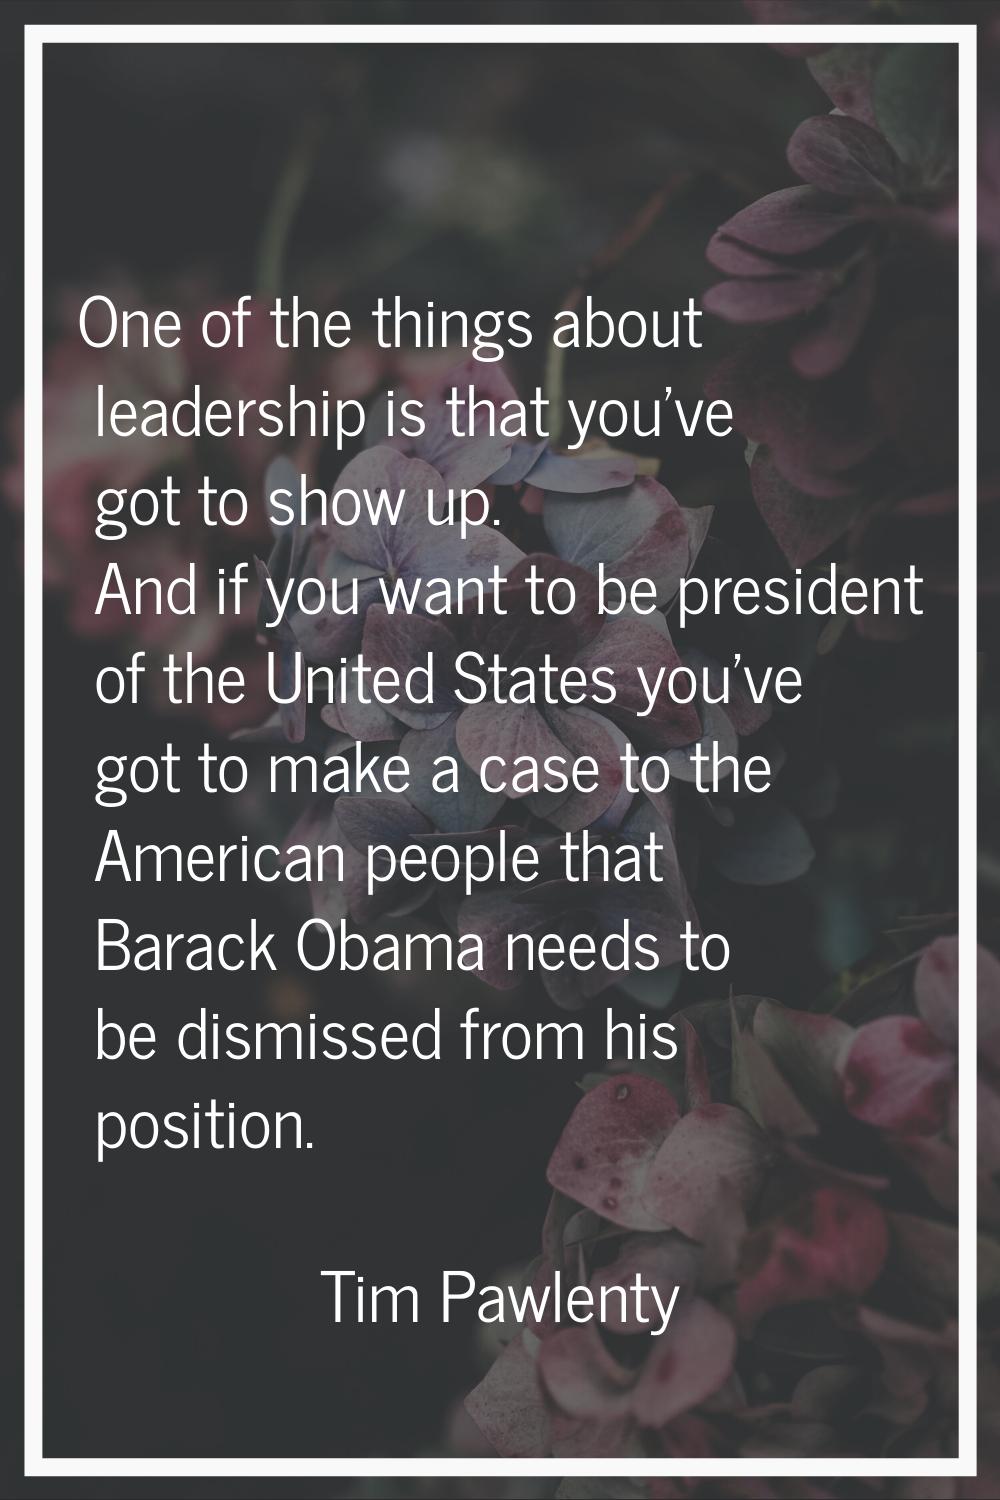 One of the things about leadership is that you've got to show up. And if you want to be president o